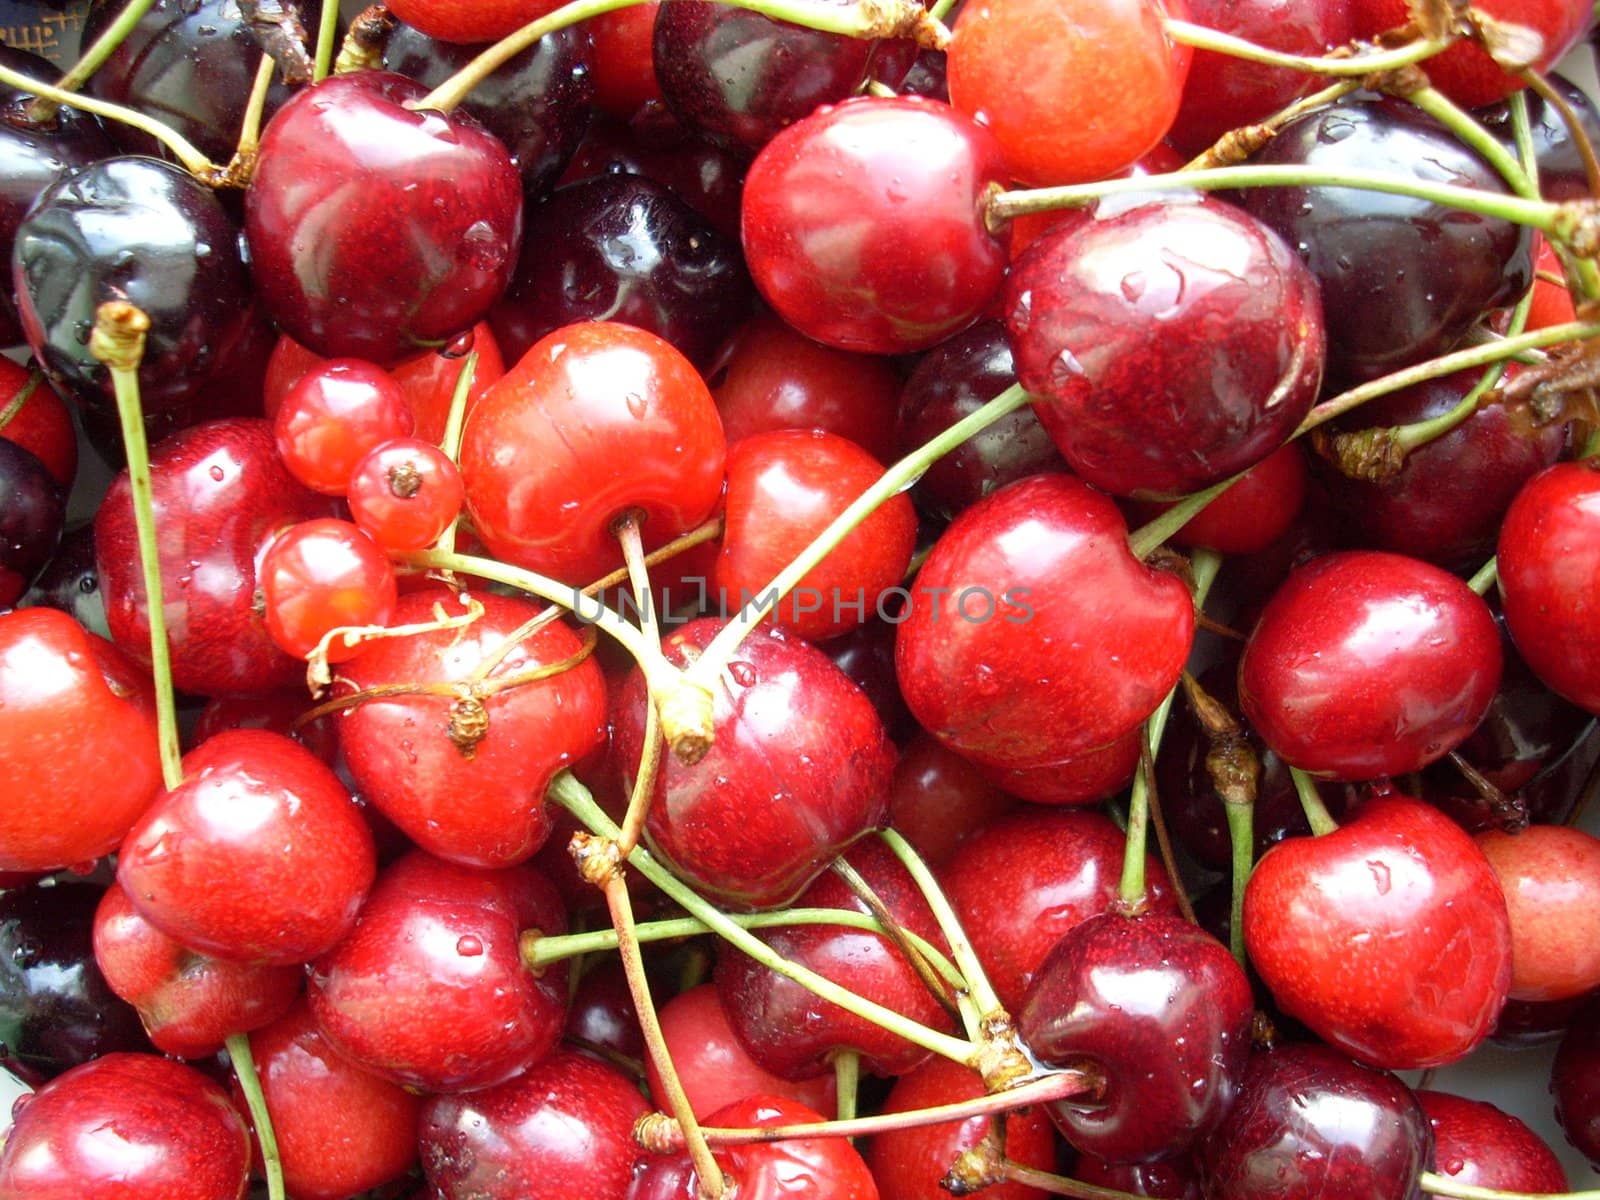 This is a photograph of some fresh and sweet cherries